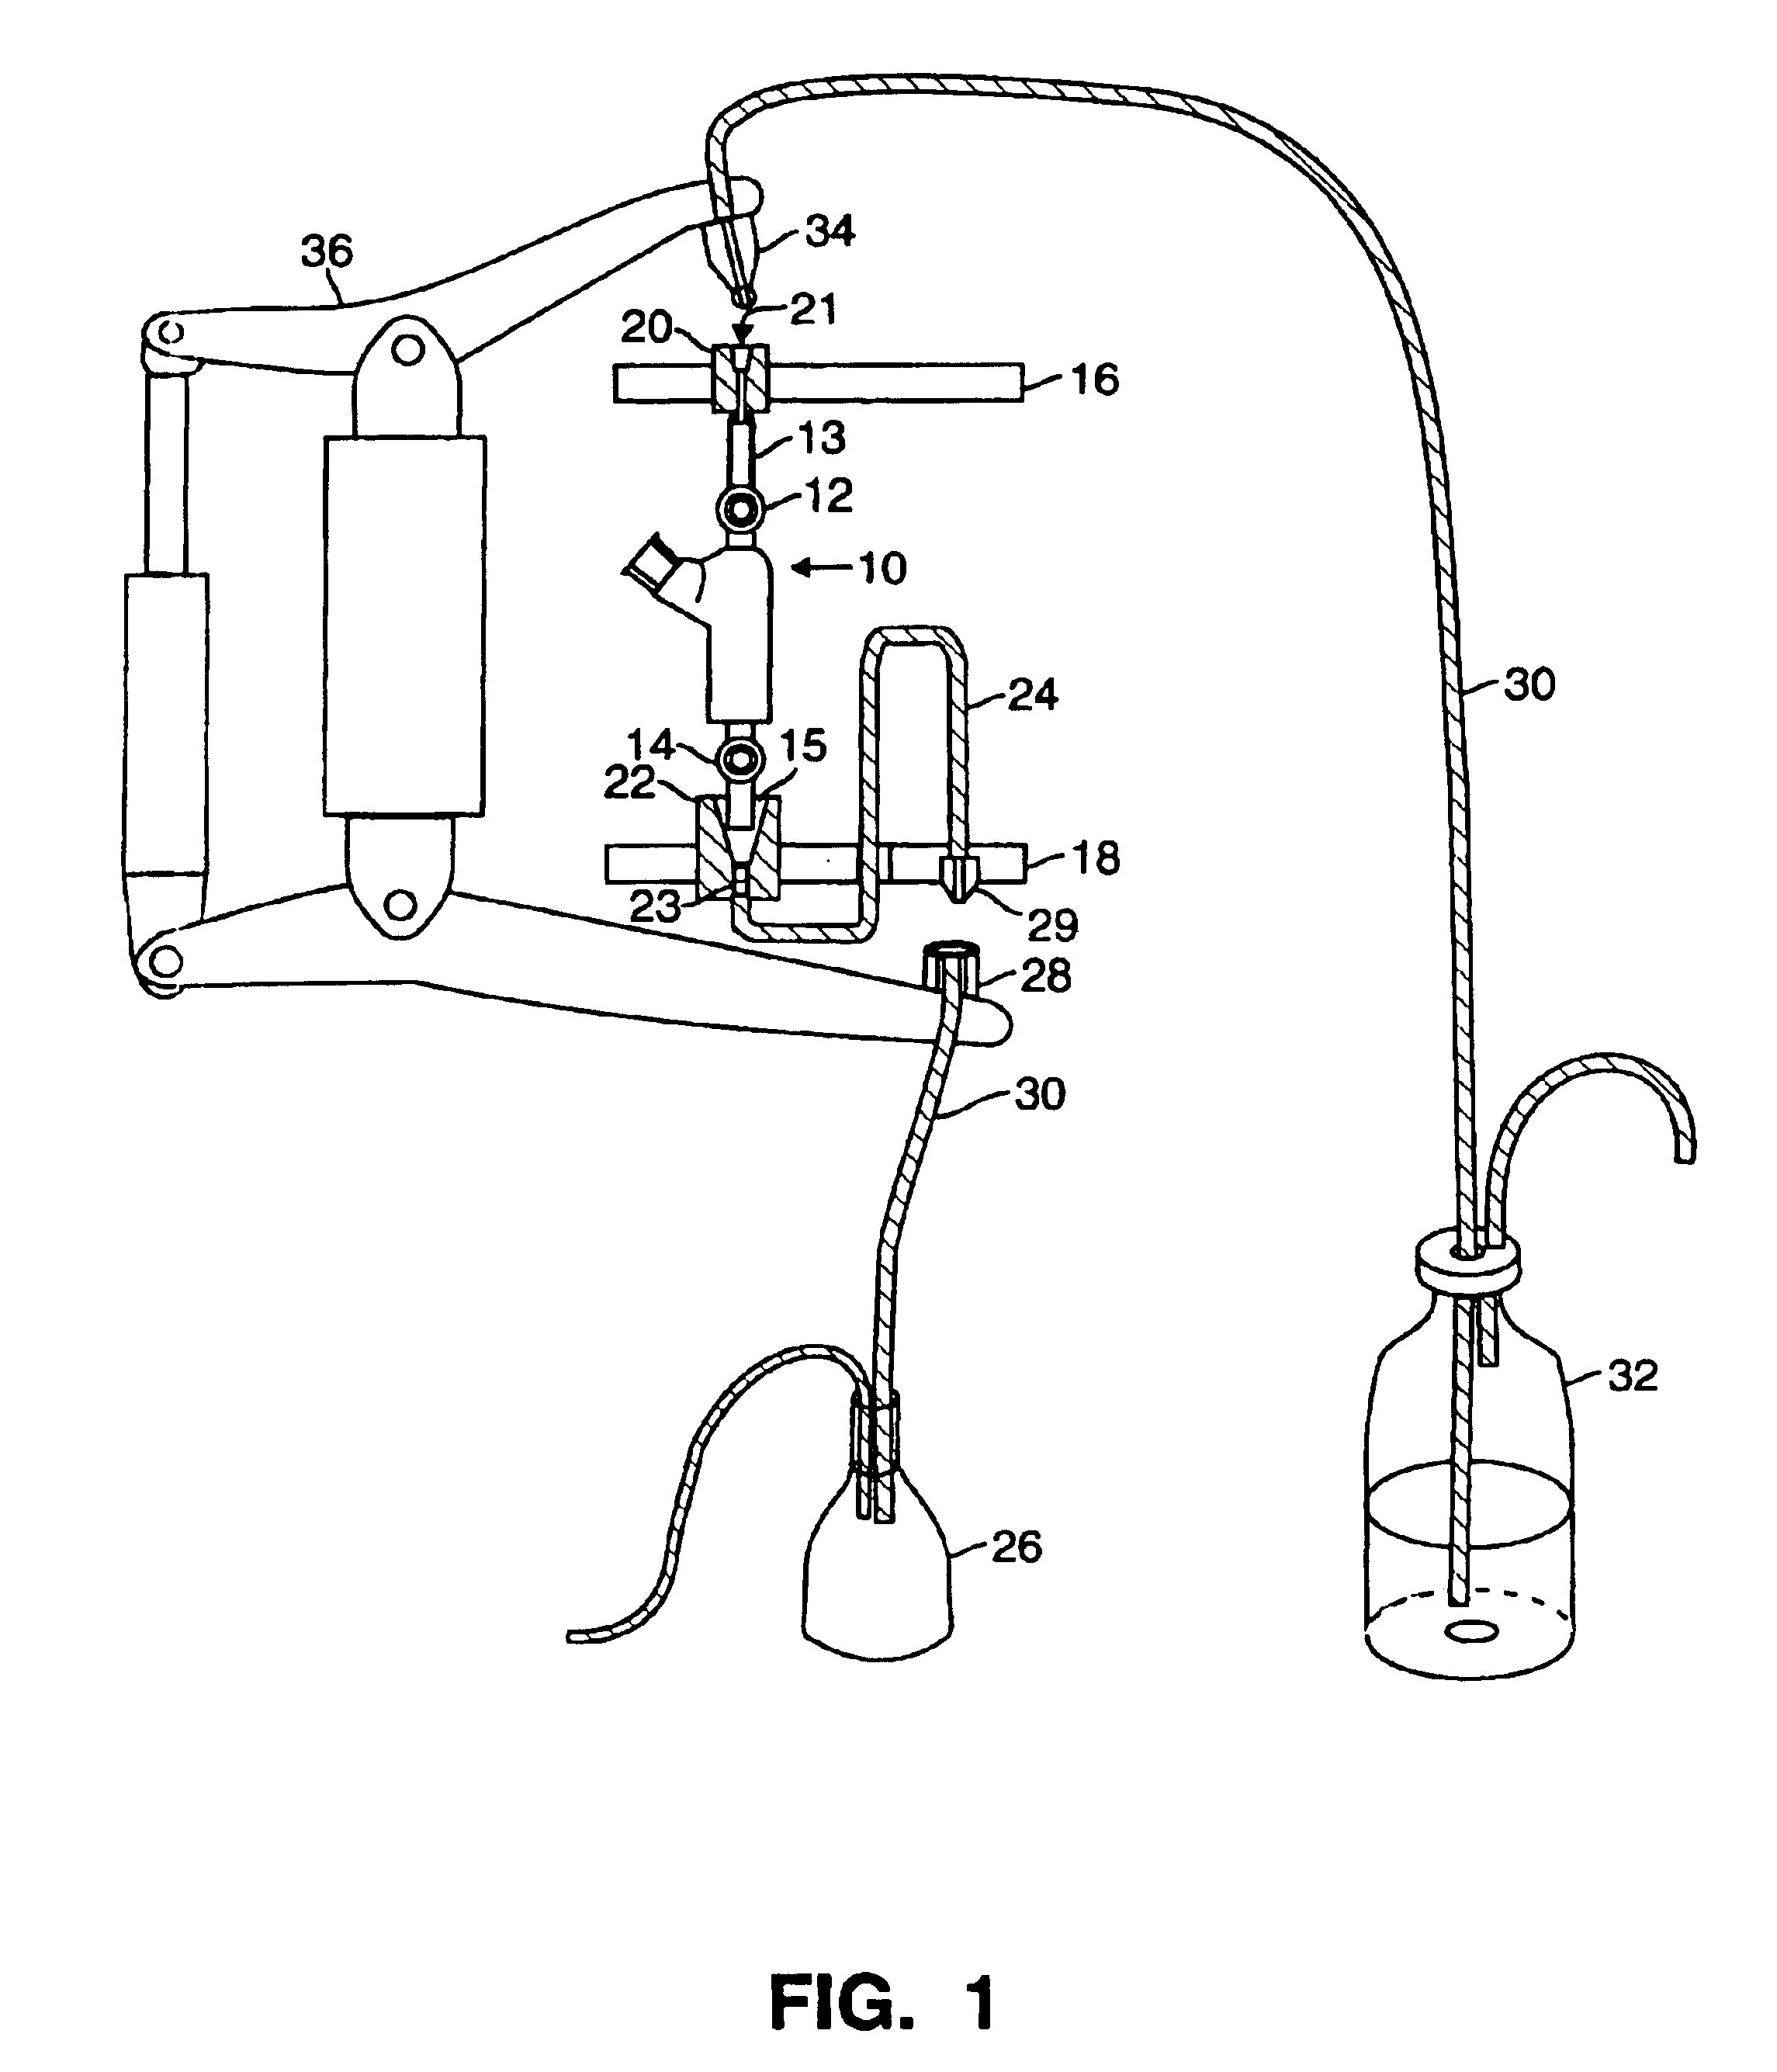 Method and apparatus for universal fluid exchange